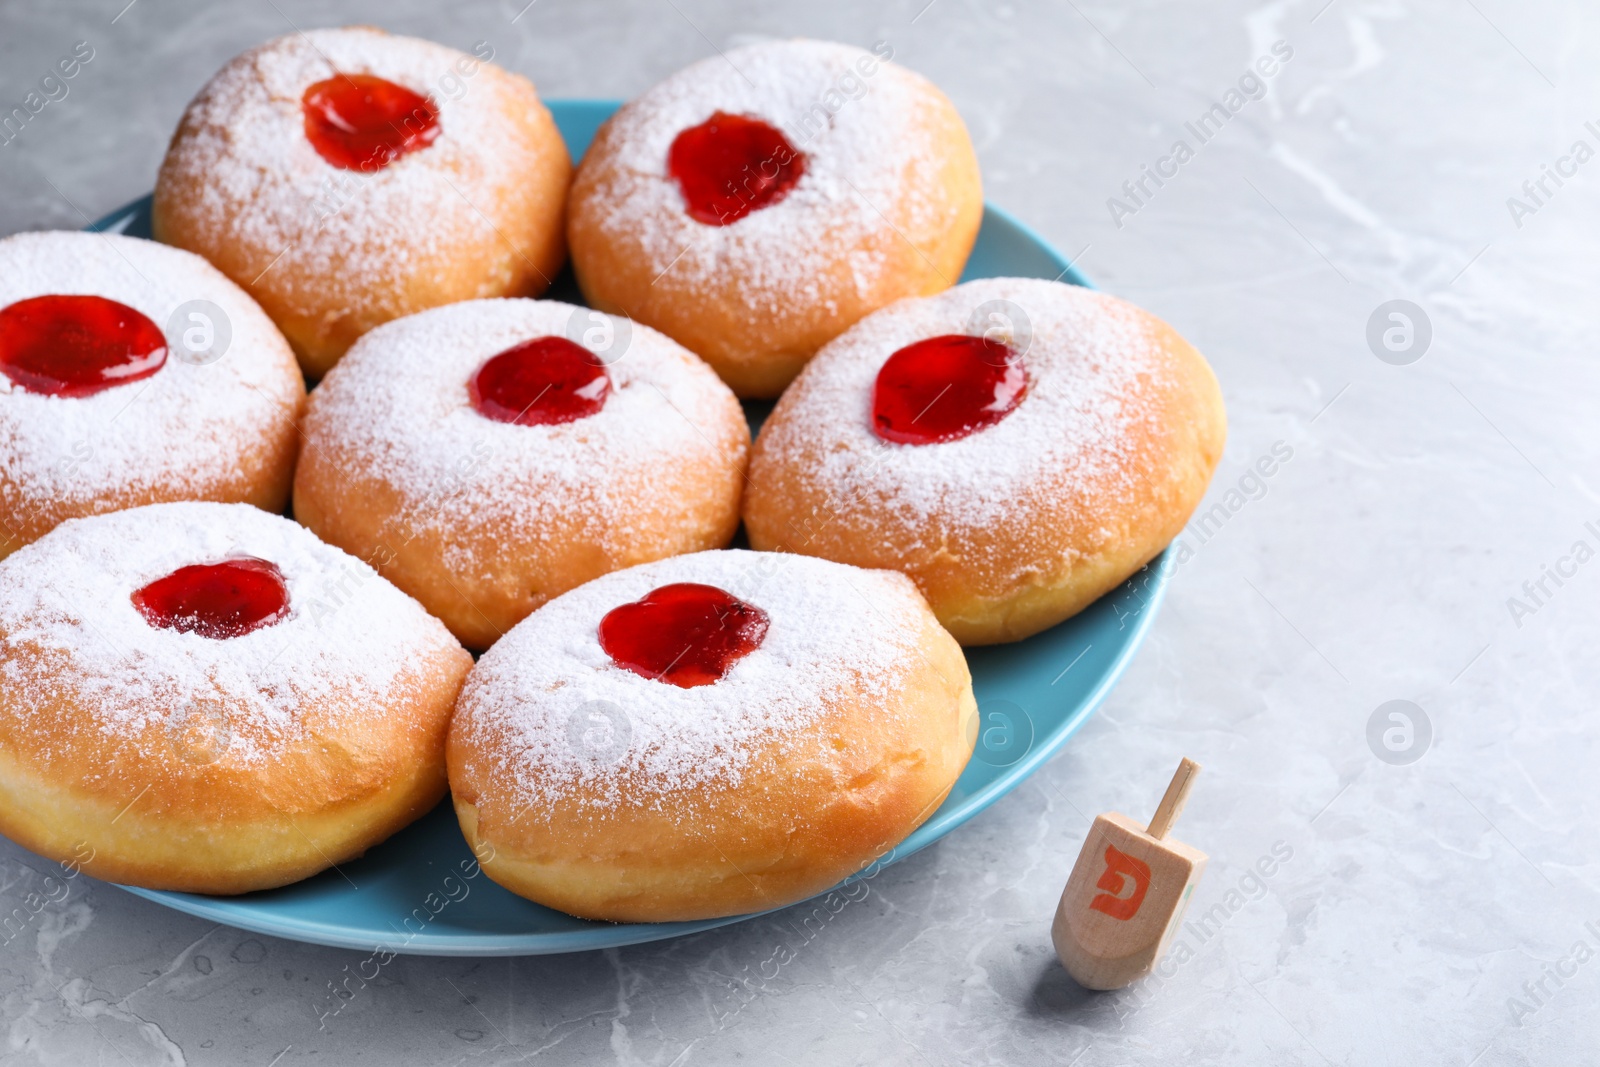 Photo of Hanukkah doughnuts with jelly and dreidel on grey table